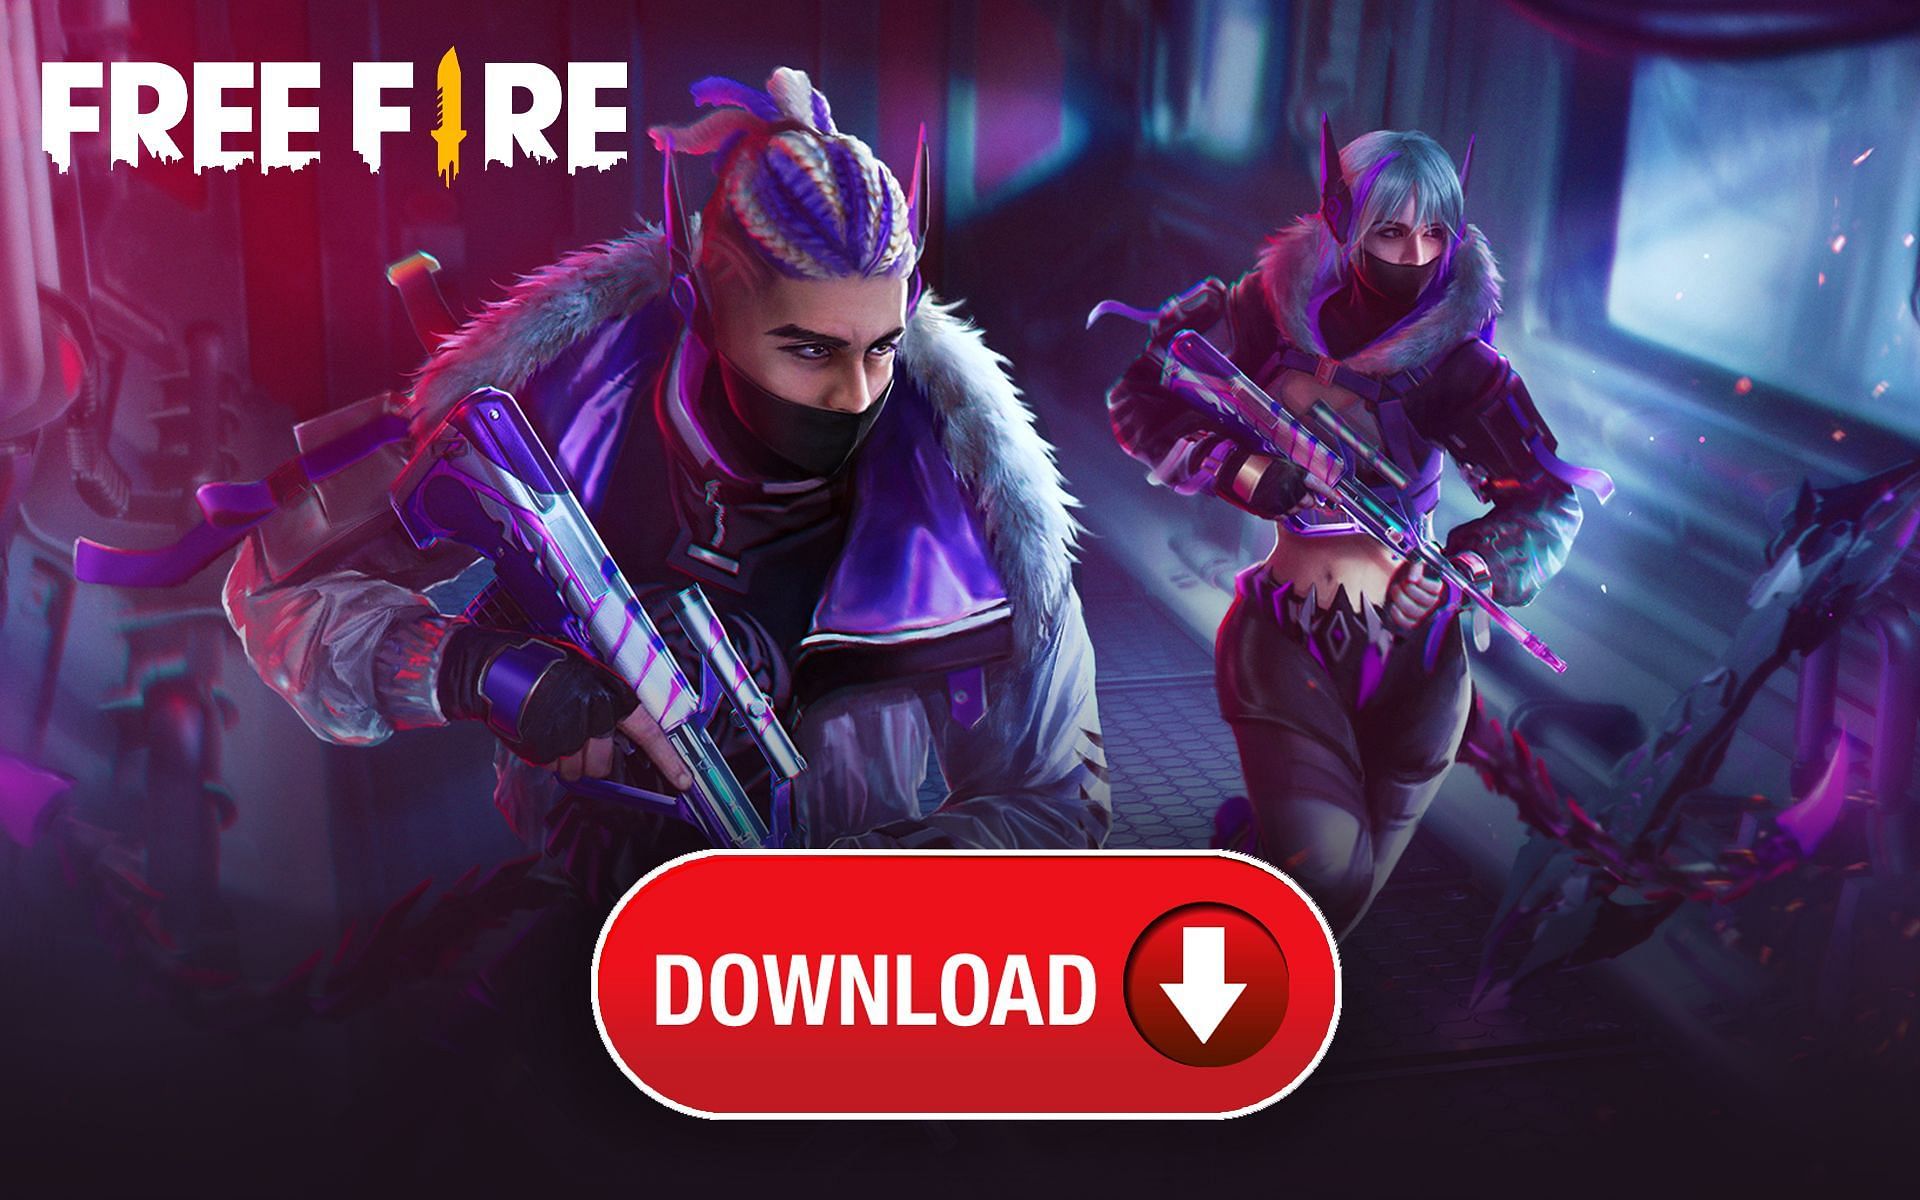 Free FIRE Download PC Game - PCGameLab - PC Games Free Download - Direct &  Torrent Links